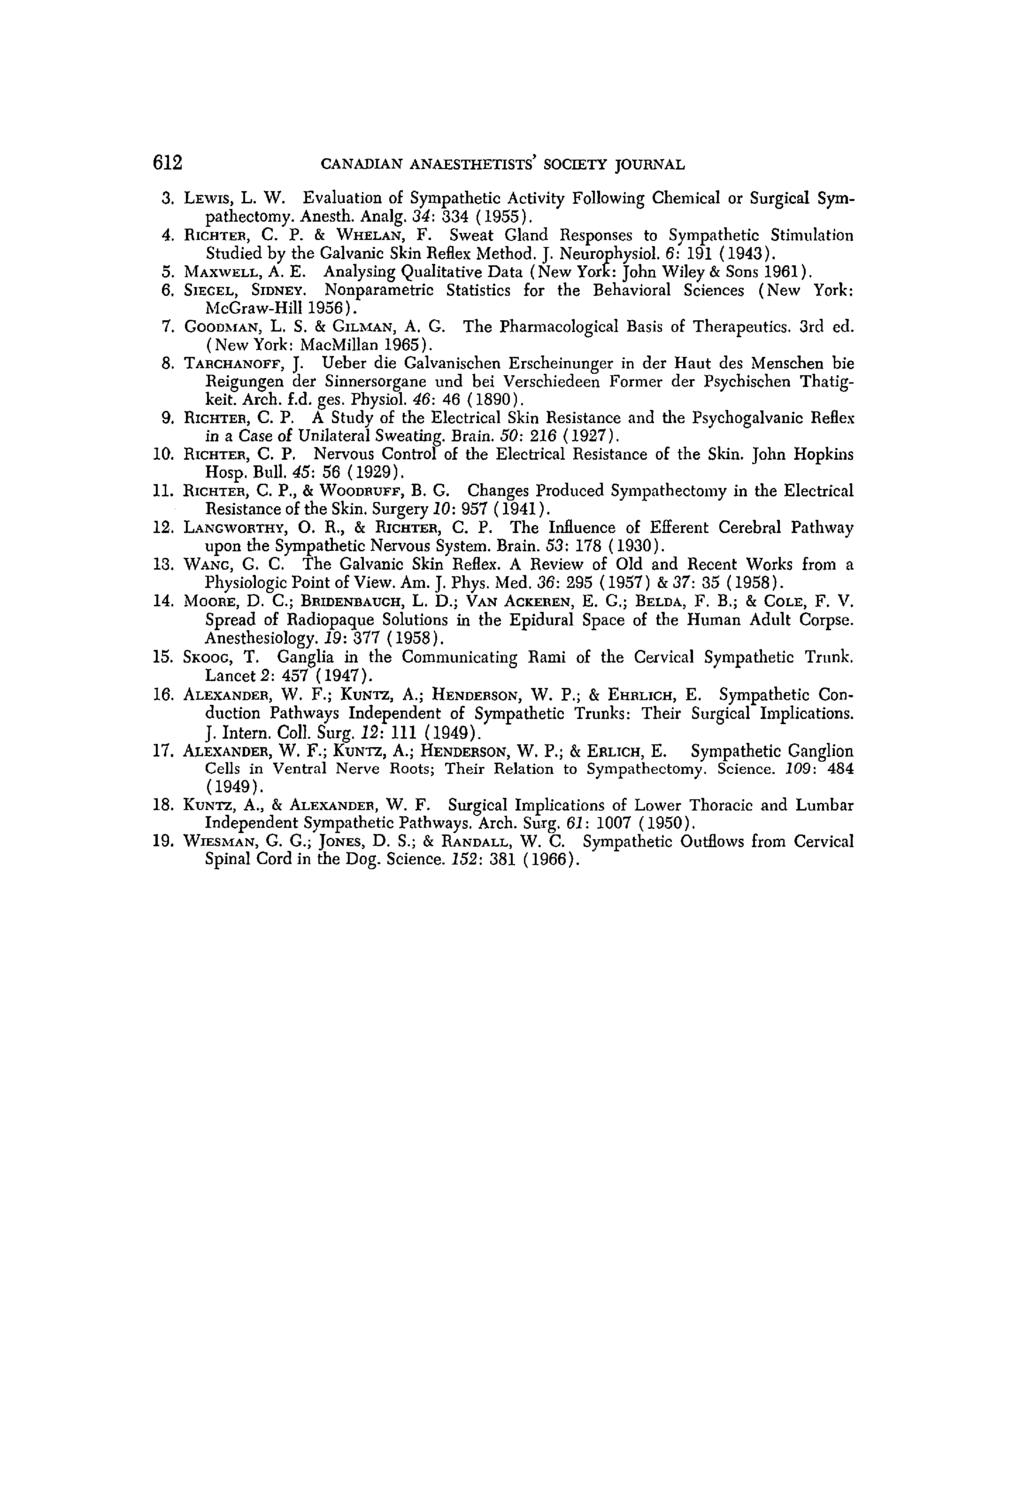 612 CANADIAN ANAESTHETISTS' SOCIETY JOURNAL 3. LEWIS, L.W. Evaluation of Sympathetic Activity Following Chemical or Surgical Sympatheetomy. Anesth. Analg. 34:334 (1955). 4. RICHTER, C. P. & WHELAN, F.